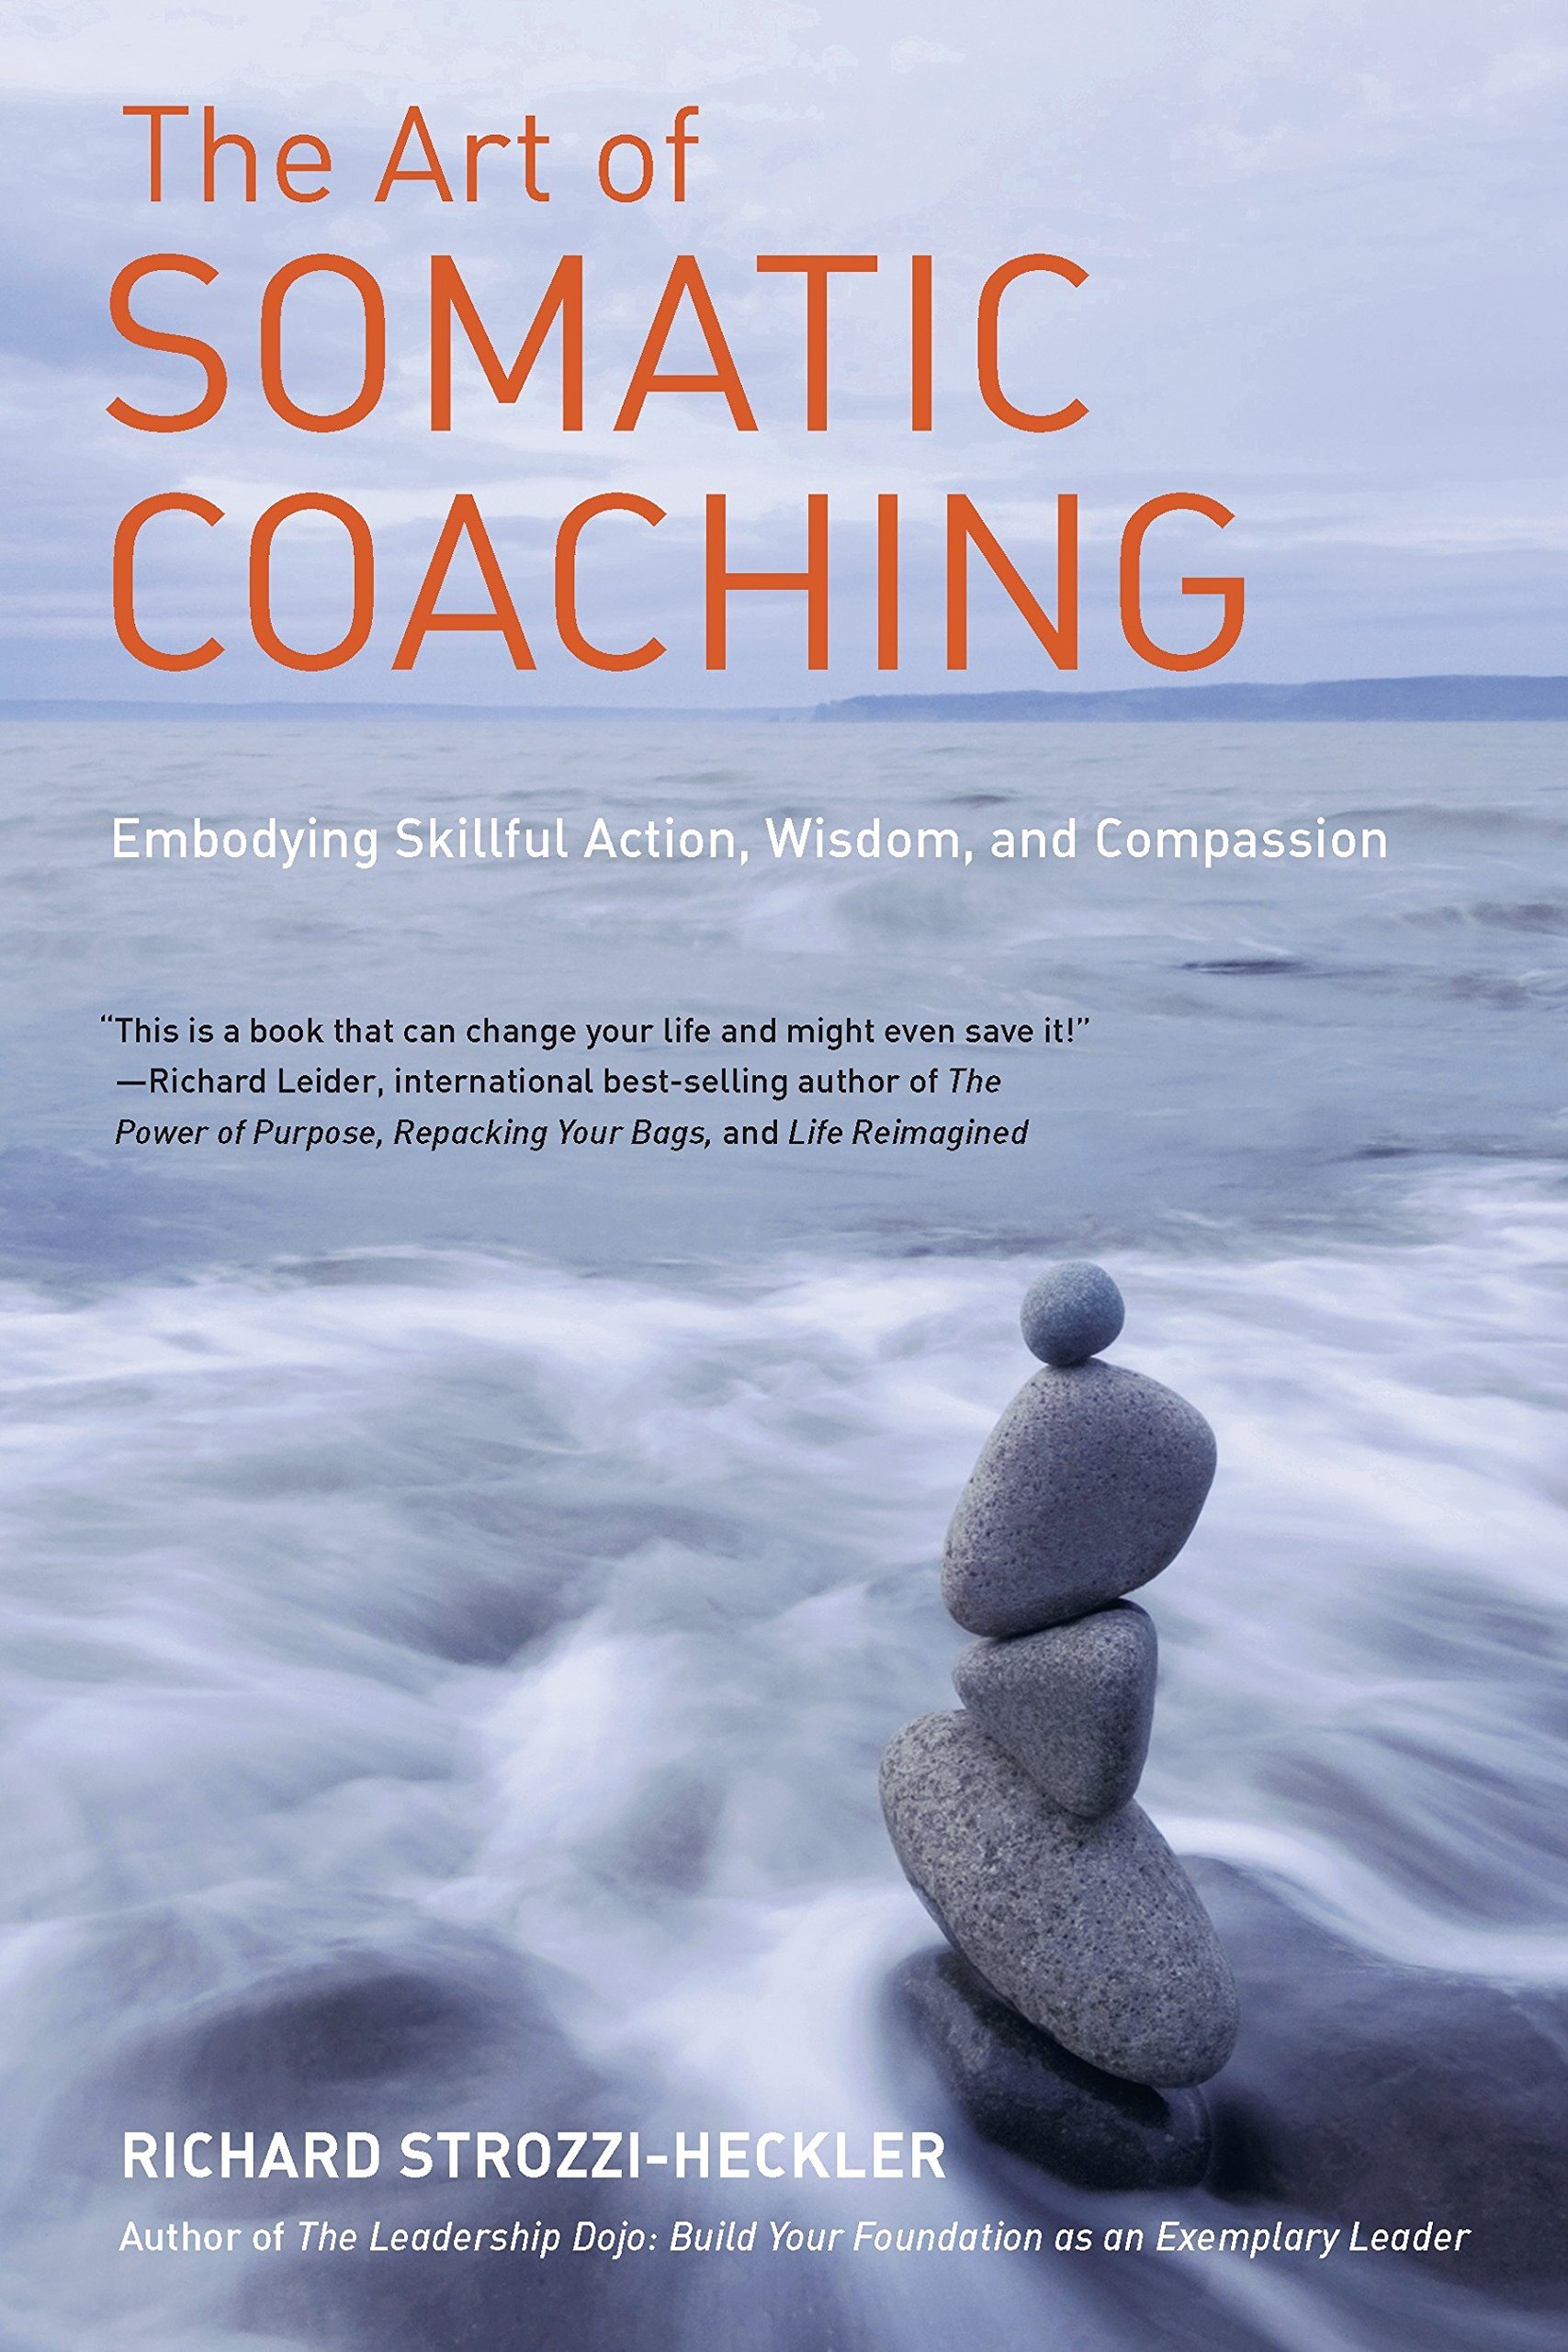 The Art of Somatic Coaching: Embodying Skillful Action, Wisdom, and Compassion - Richard Strozzi-Heckler